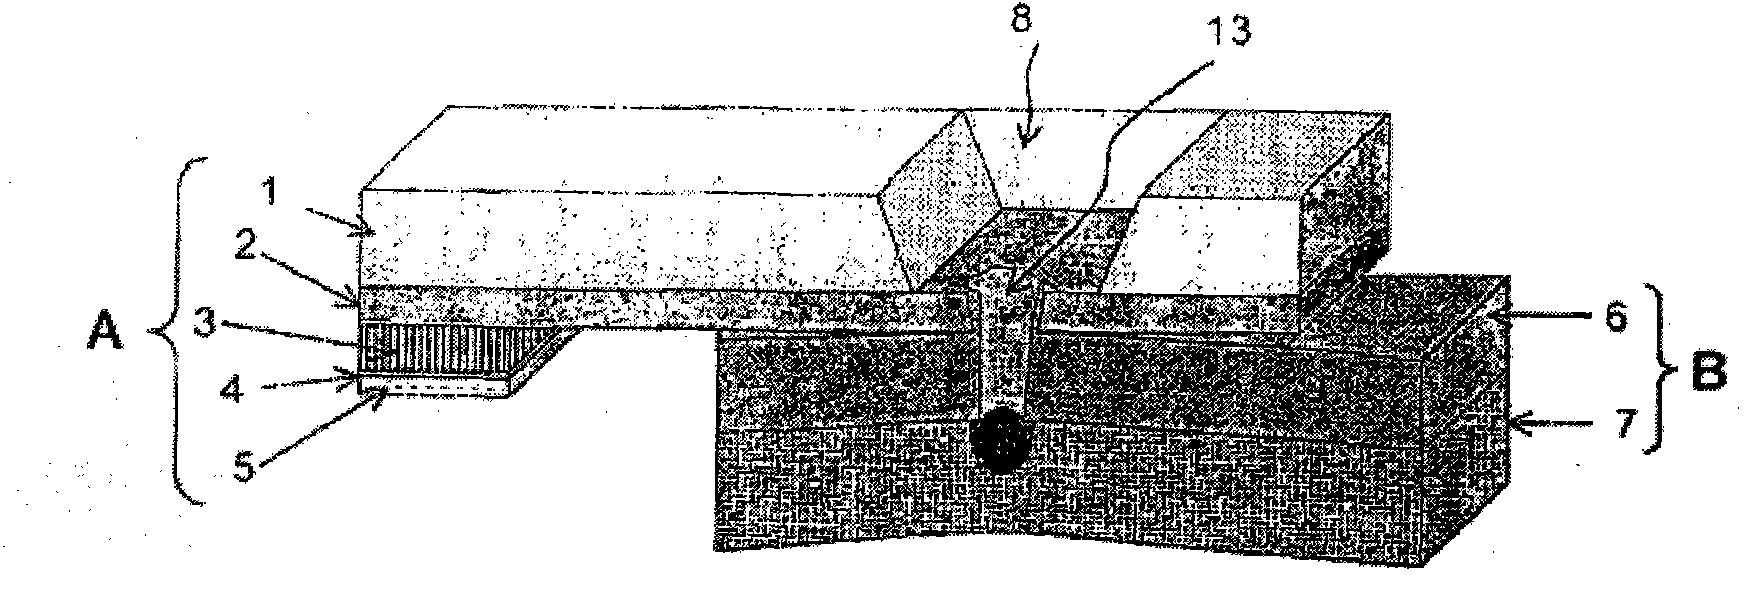 Means and method for connecting thin metal layers